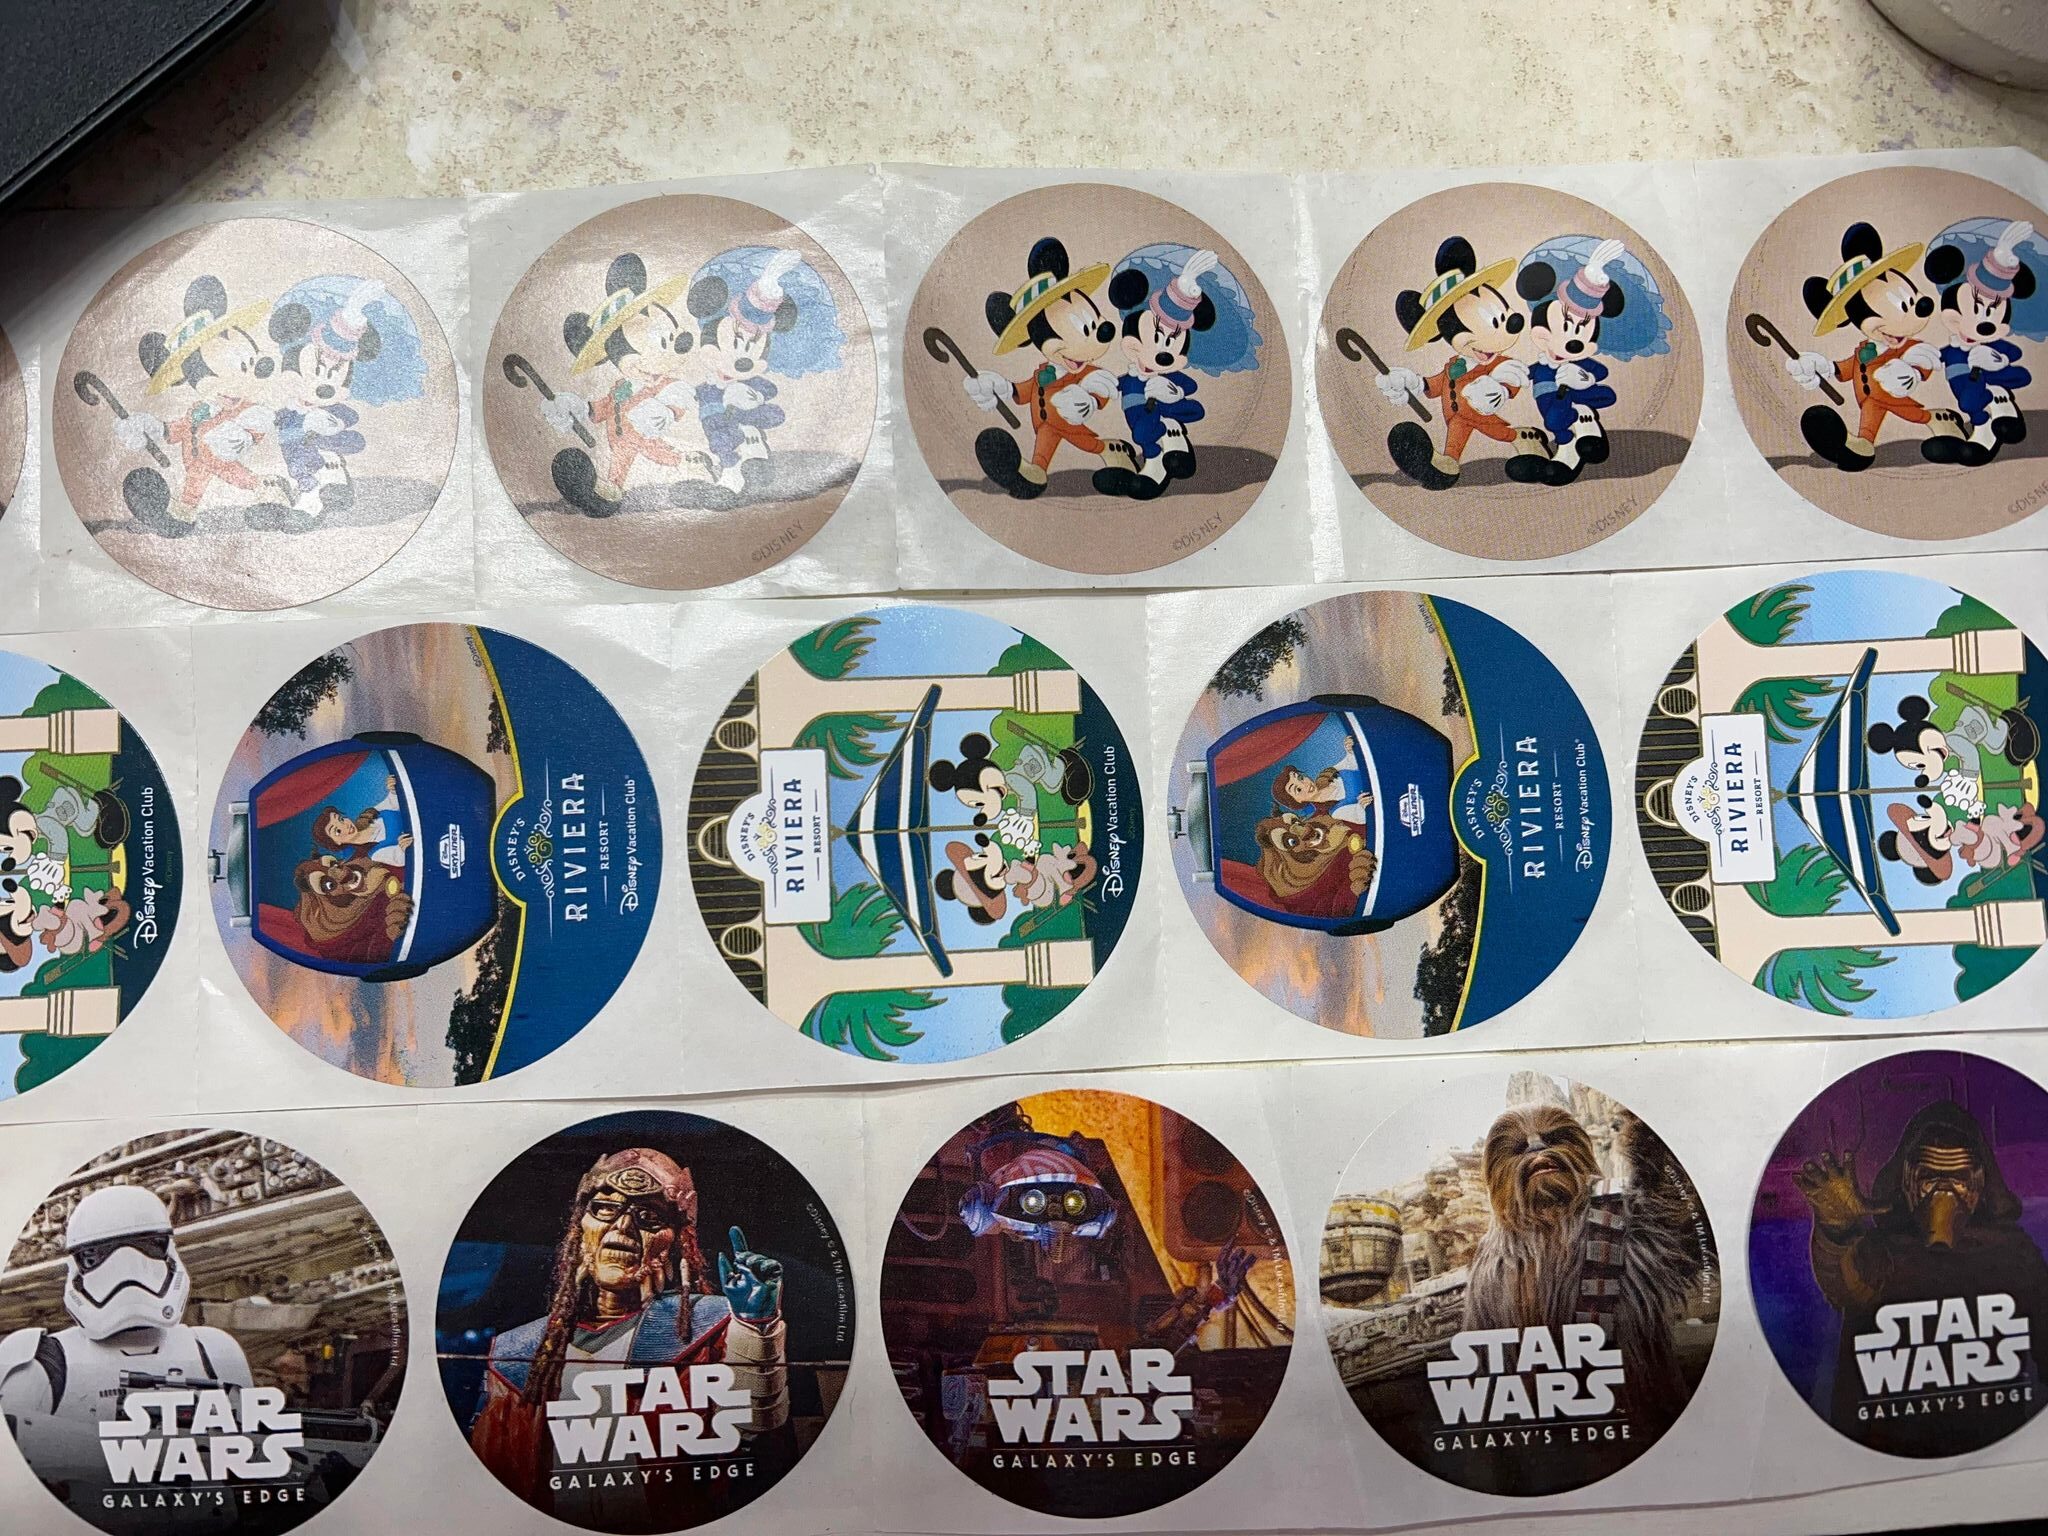 13 Free Disney World Souvenirs To Bring the Magic Home Tips 6